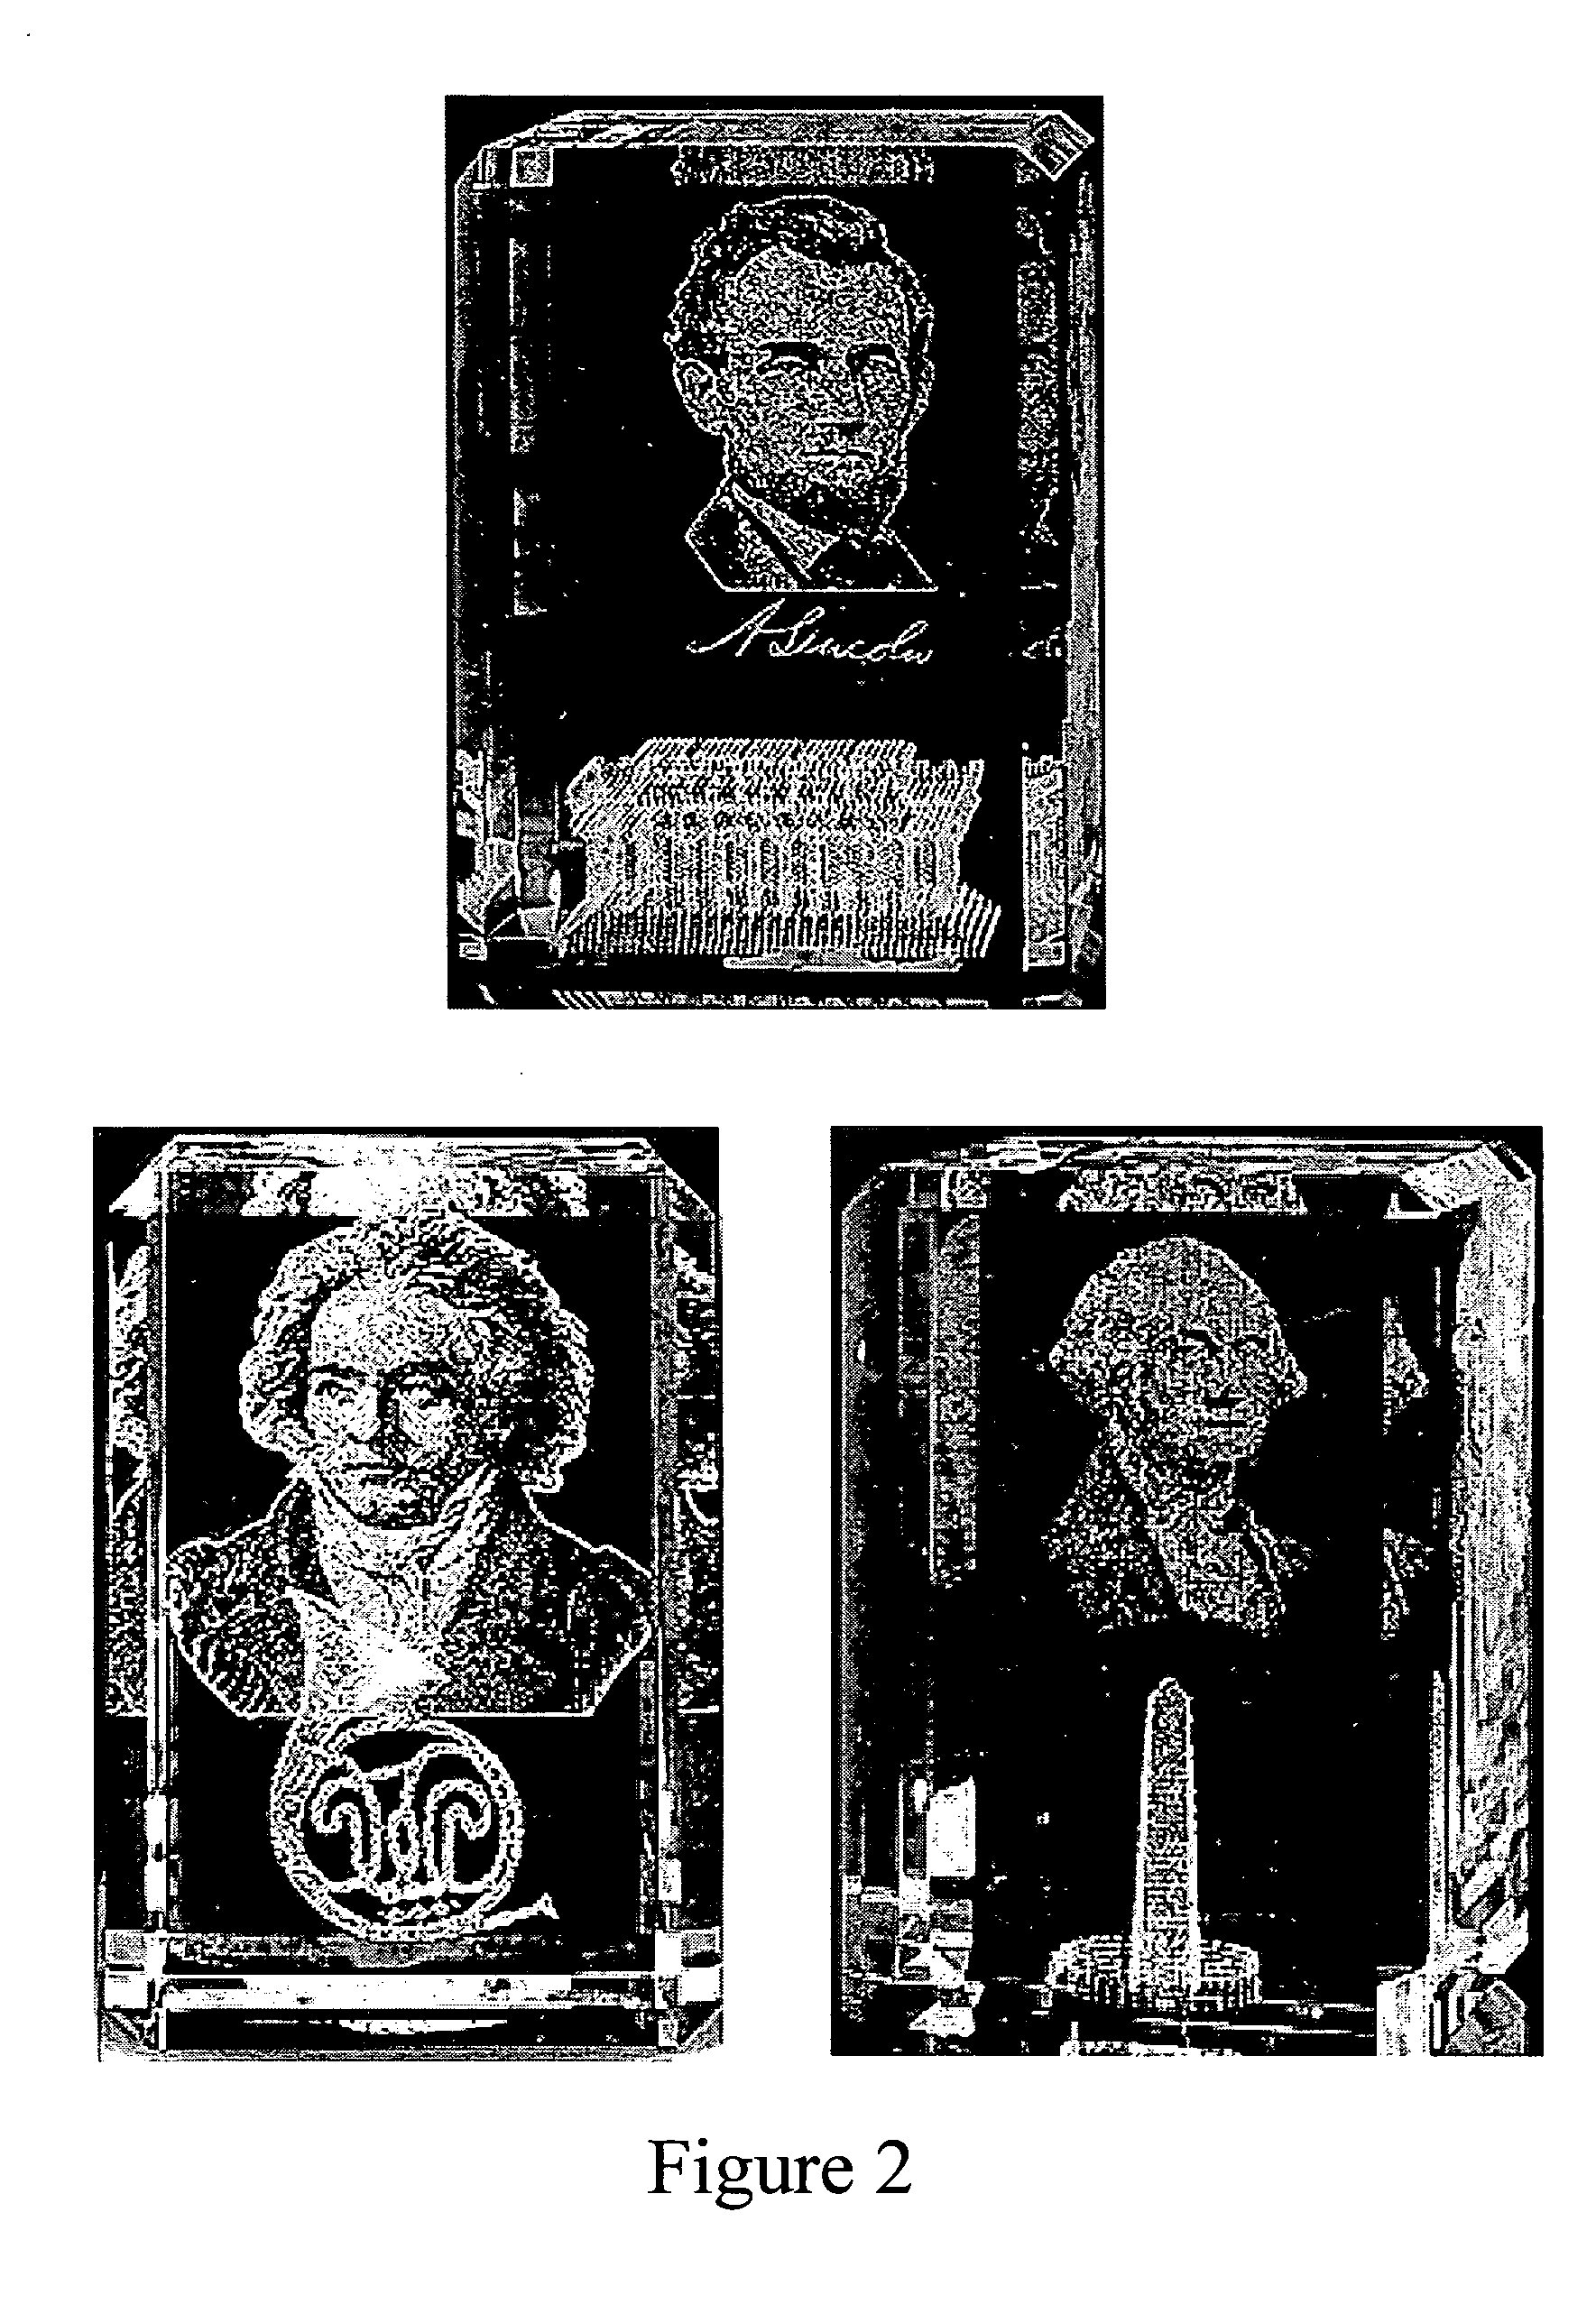 Laser-computer graphics system for generating portrait and 3-D sculpture reproductions inside optically transparent material